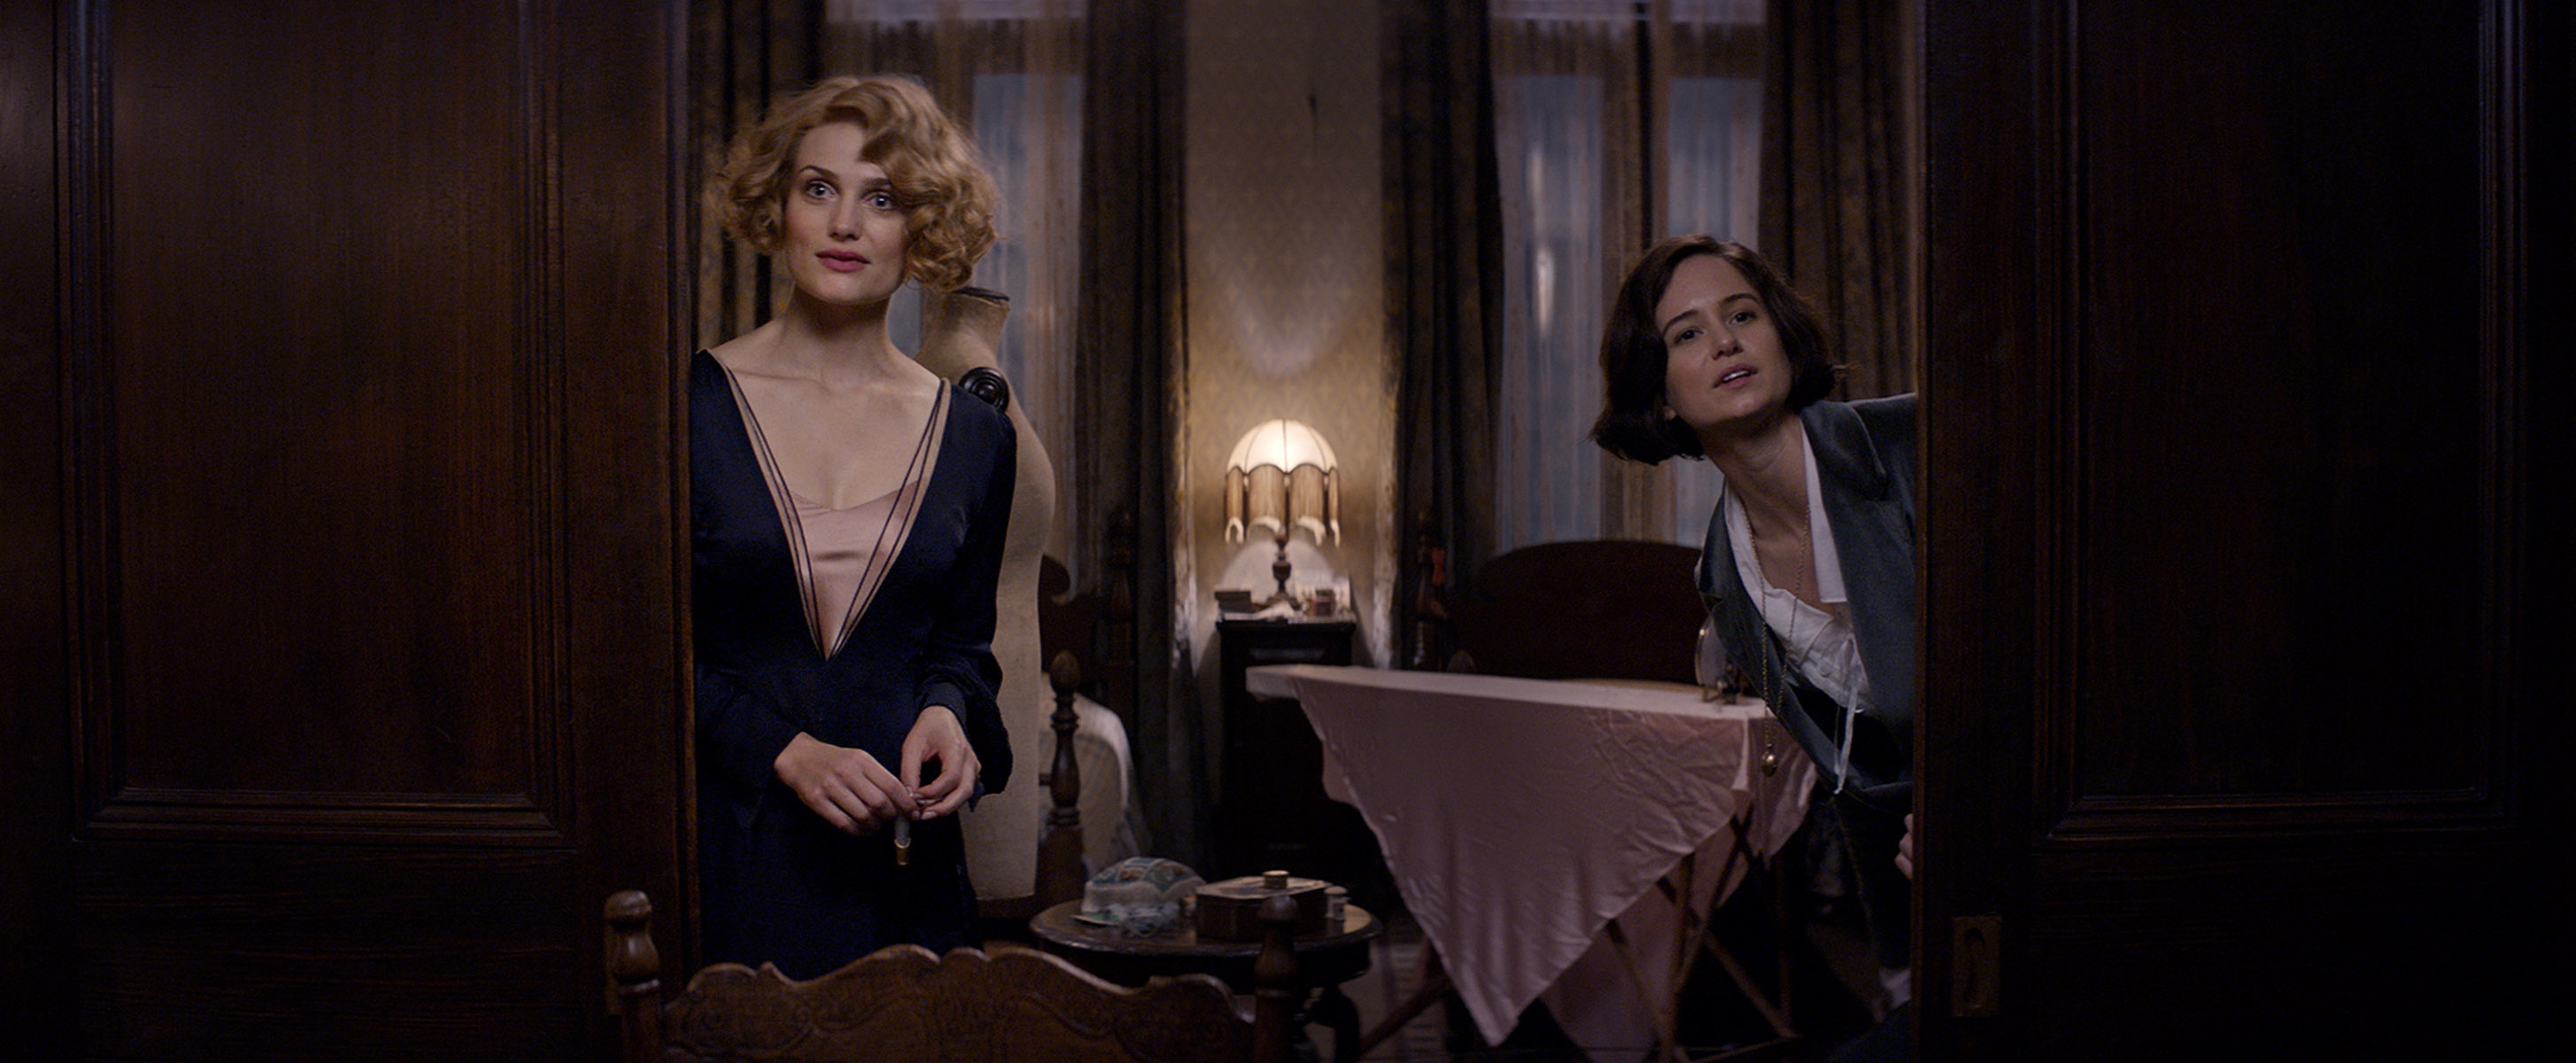 fantastic-beasts-and-where-to-find-them-katherine-waterston-alison-sudol.jpg